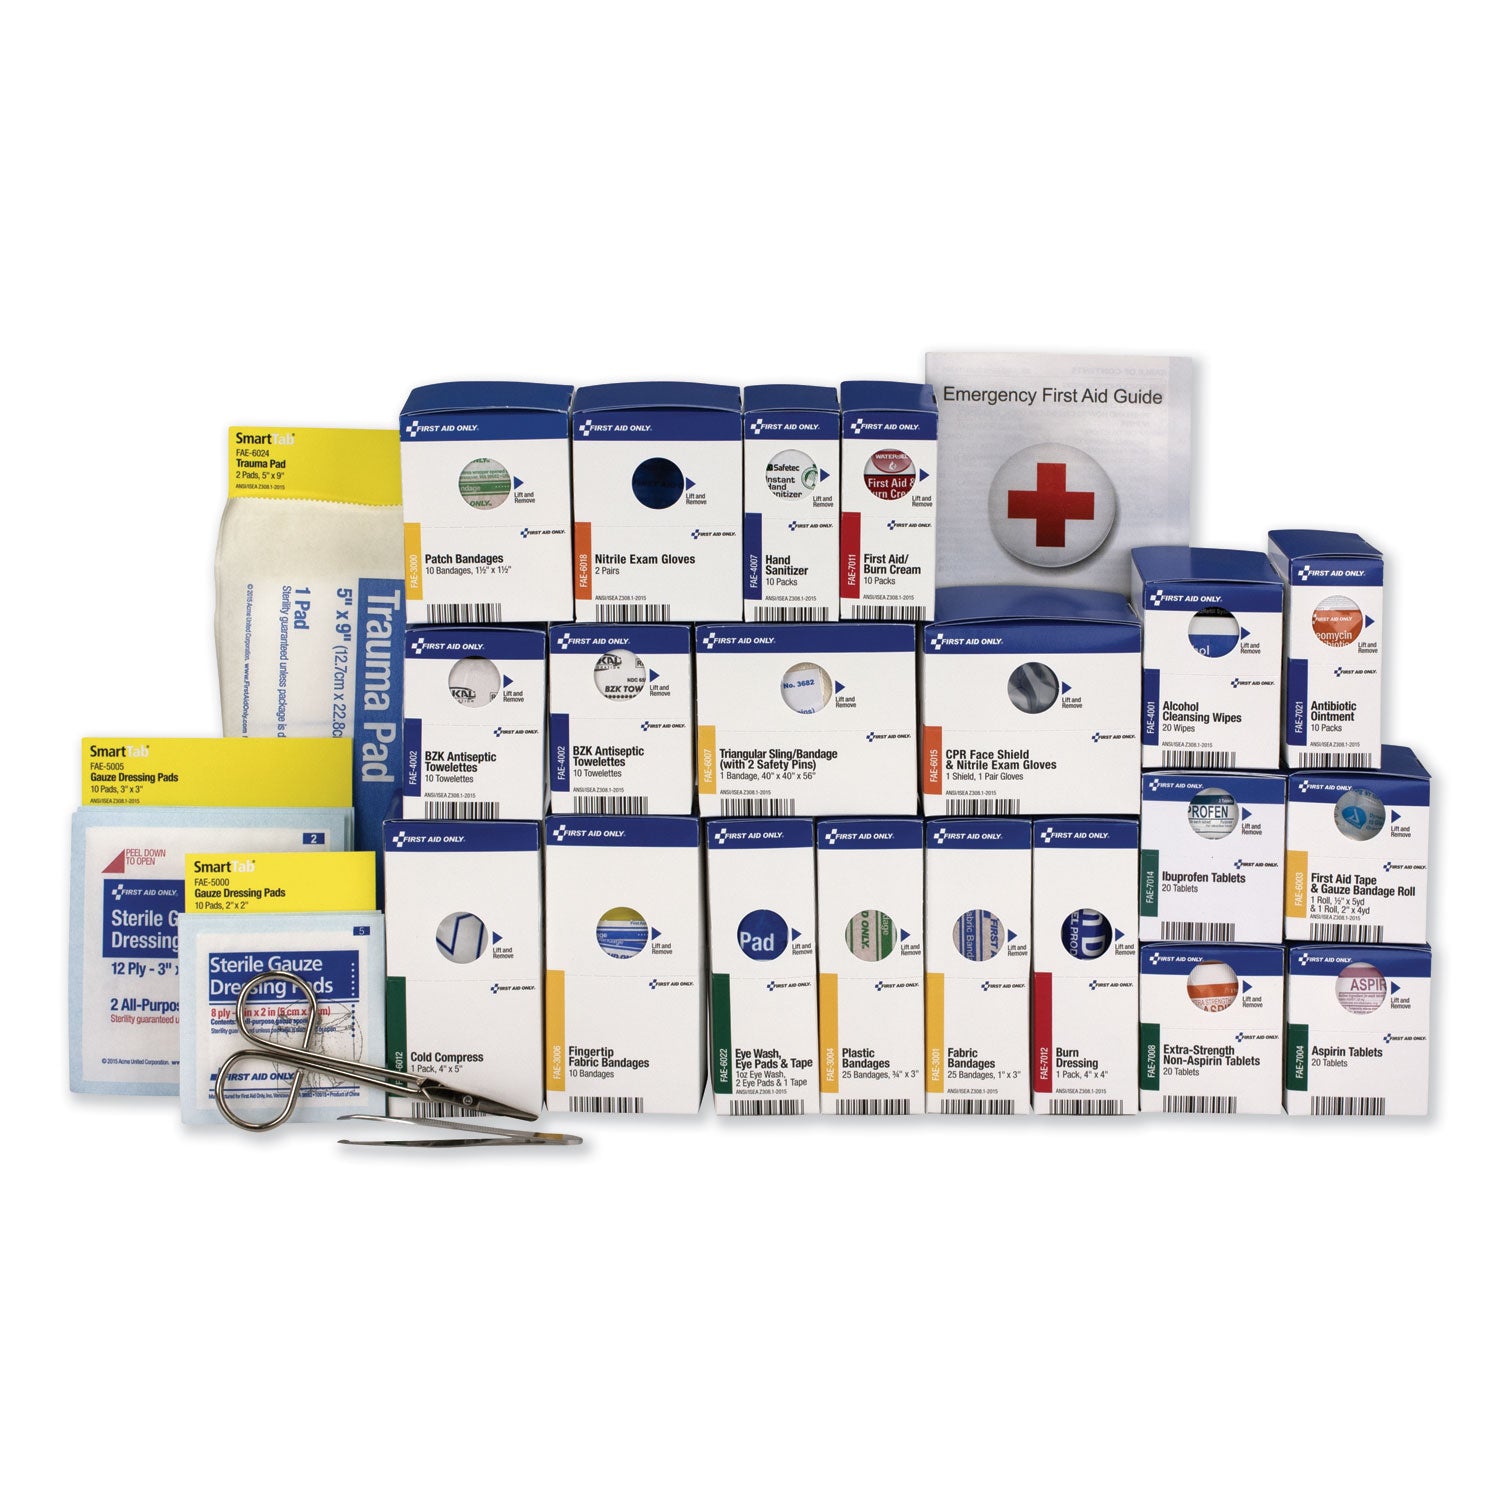 50-person-ansi-class-a+-first-aid-kit-refill-241-pieces_fao90613 - 1